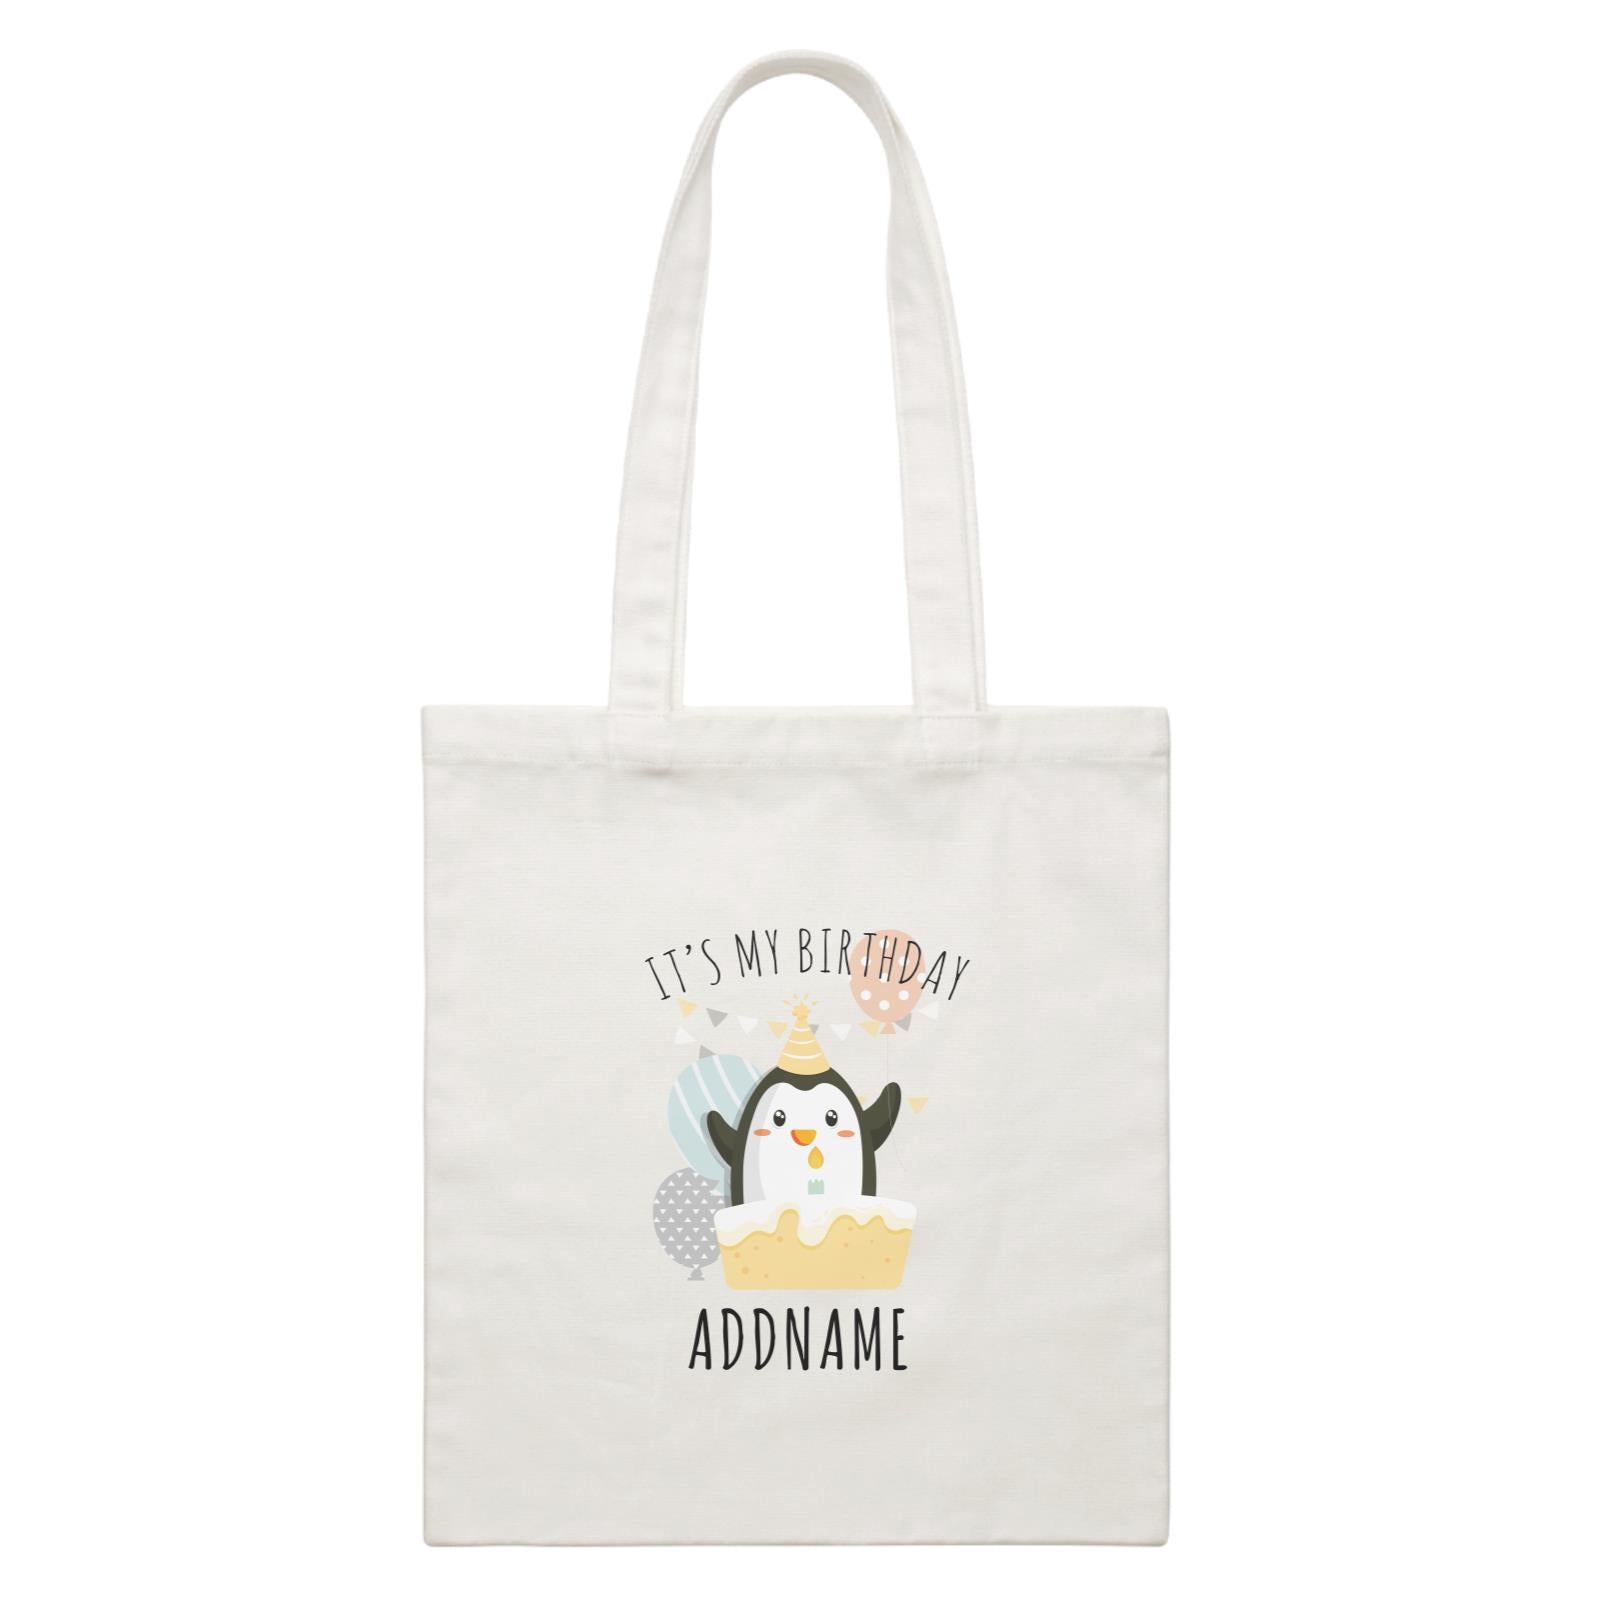 Birthday Cute Penguin And Cake It's My Birthday Addname White Canvas Bag